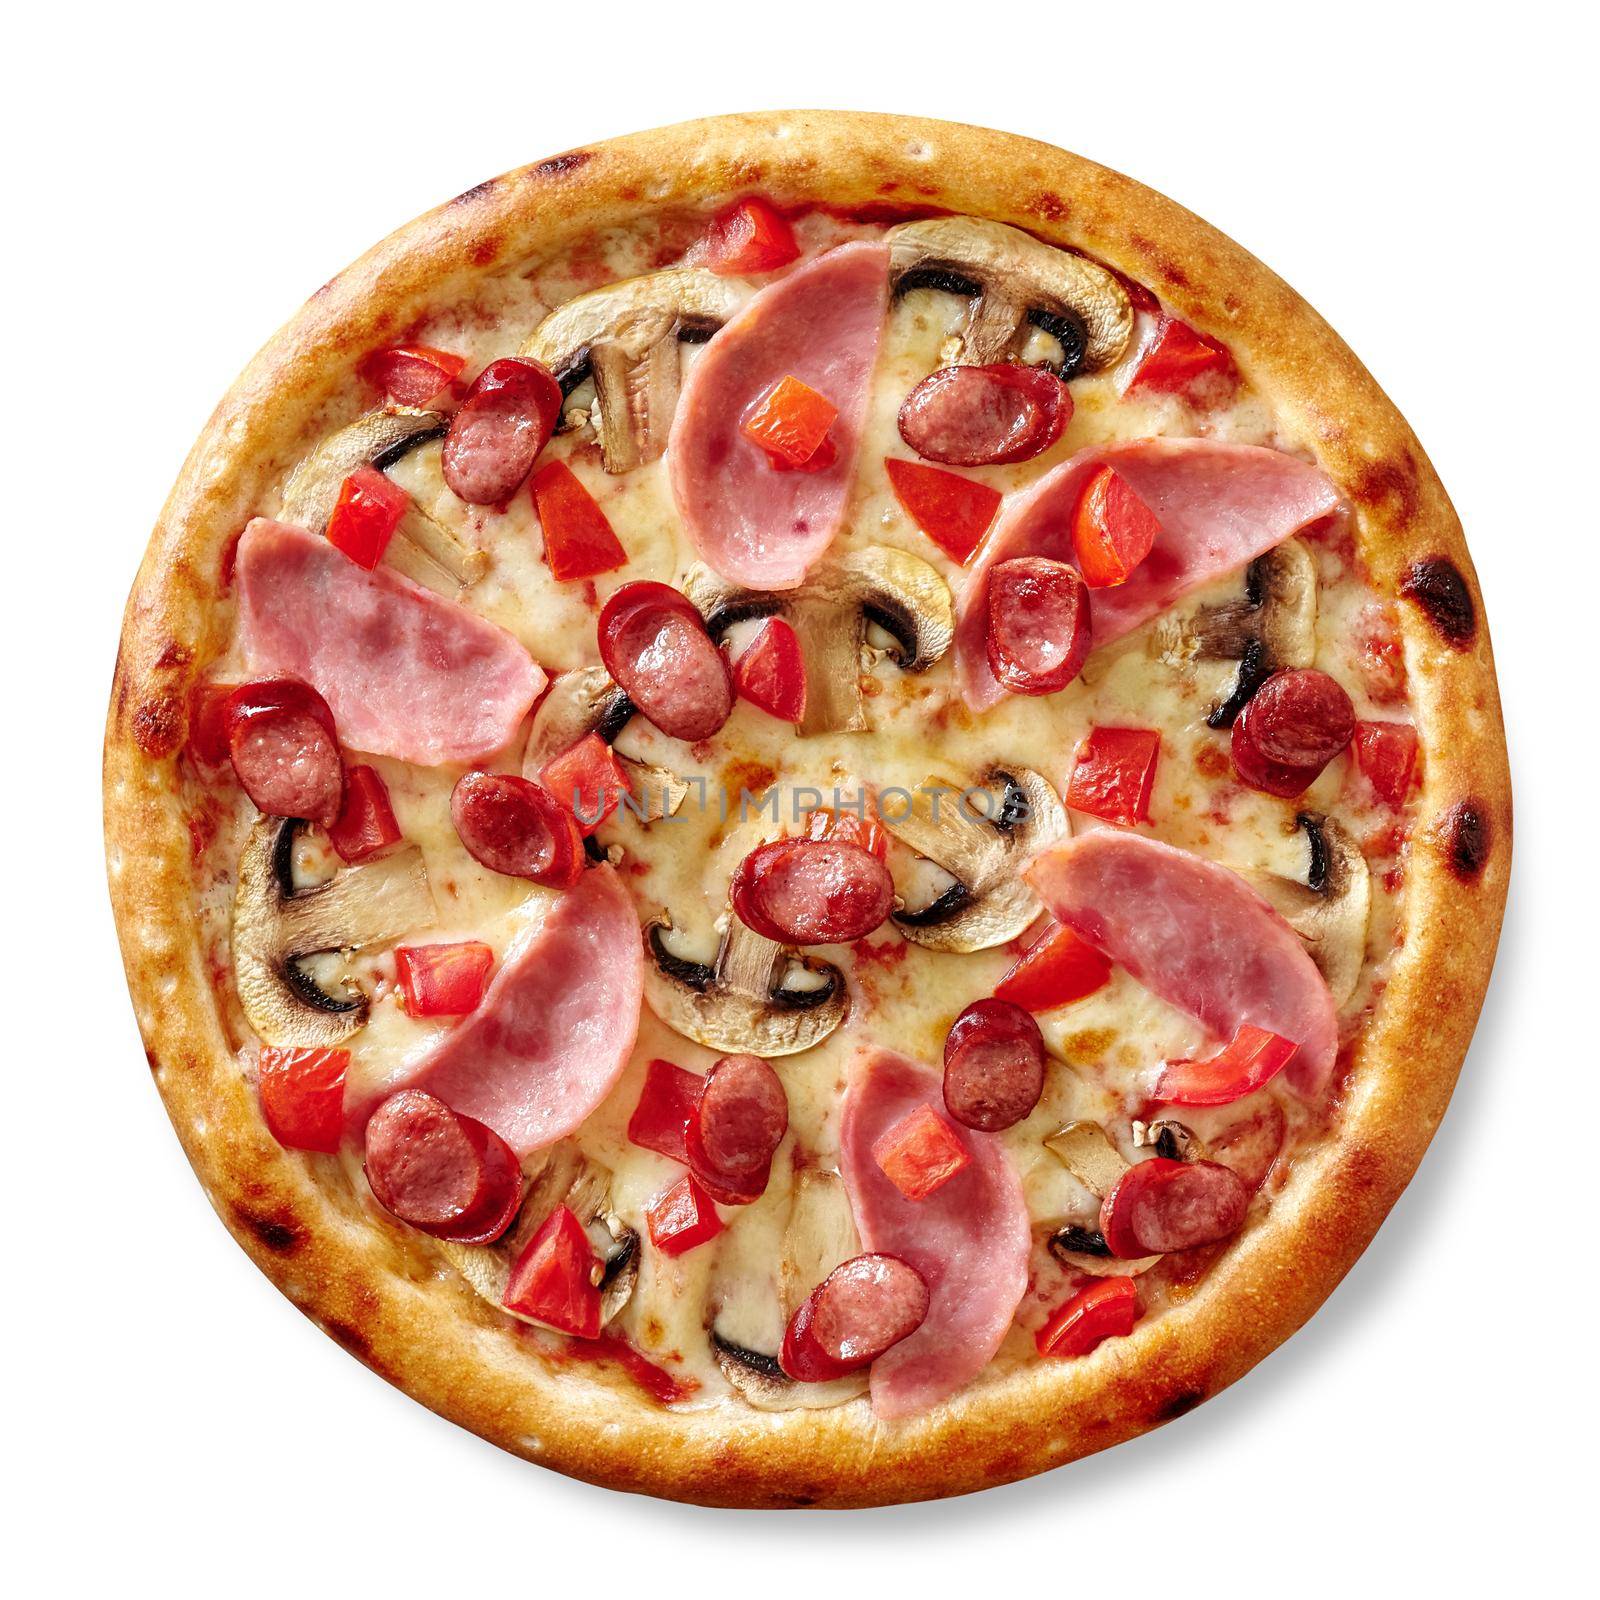 Pizza with melted mozzarella, ham, hunting sausages, mushrooms and tomatoes on white background by nazarovsergey